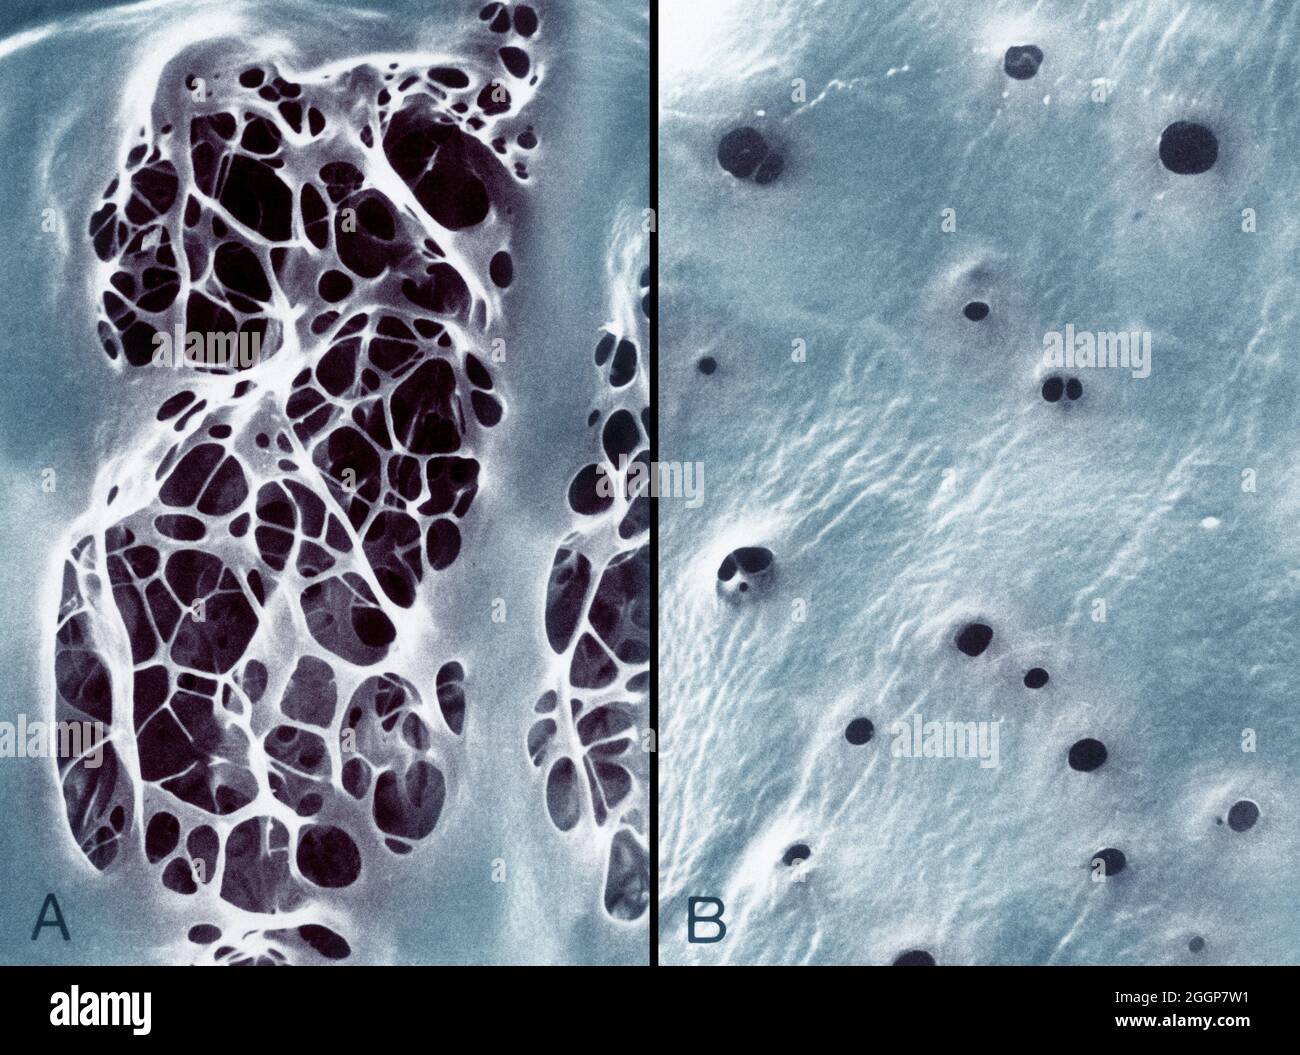 Colorized transmission electron micrographs showing, A: internal elastic lamina of an aorta, characterized by large fenestrations traversed by an irregular meshwork of elastic strands, and, B: a similar view of the internal elastic lamina of the femoral artery shows small fenestrations. Stock Photo